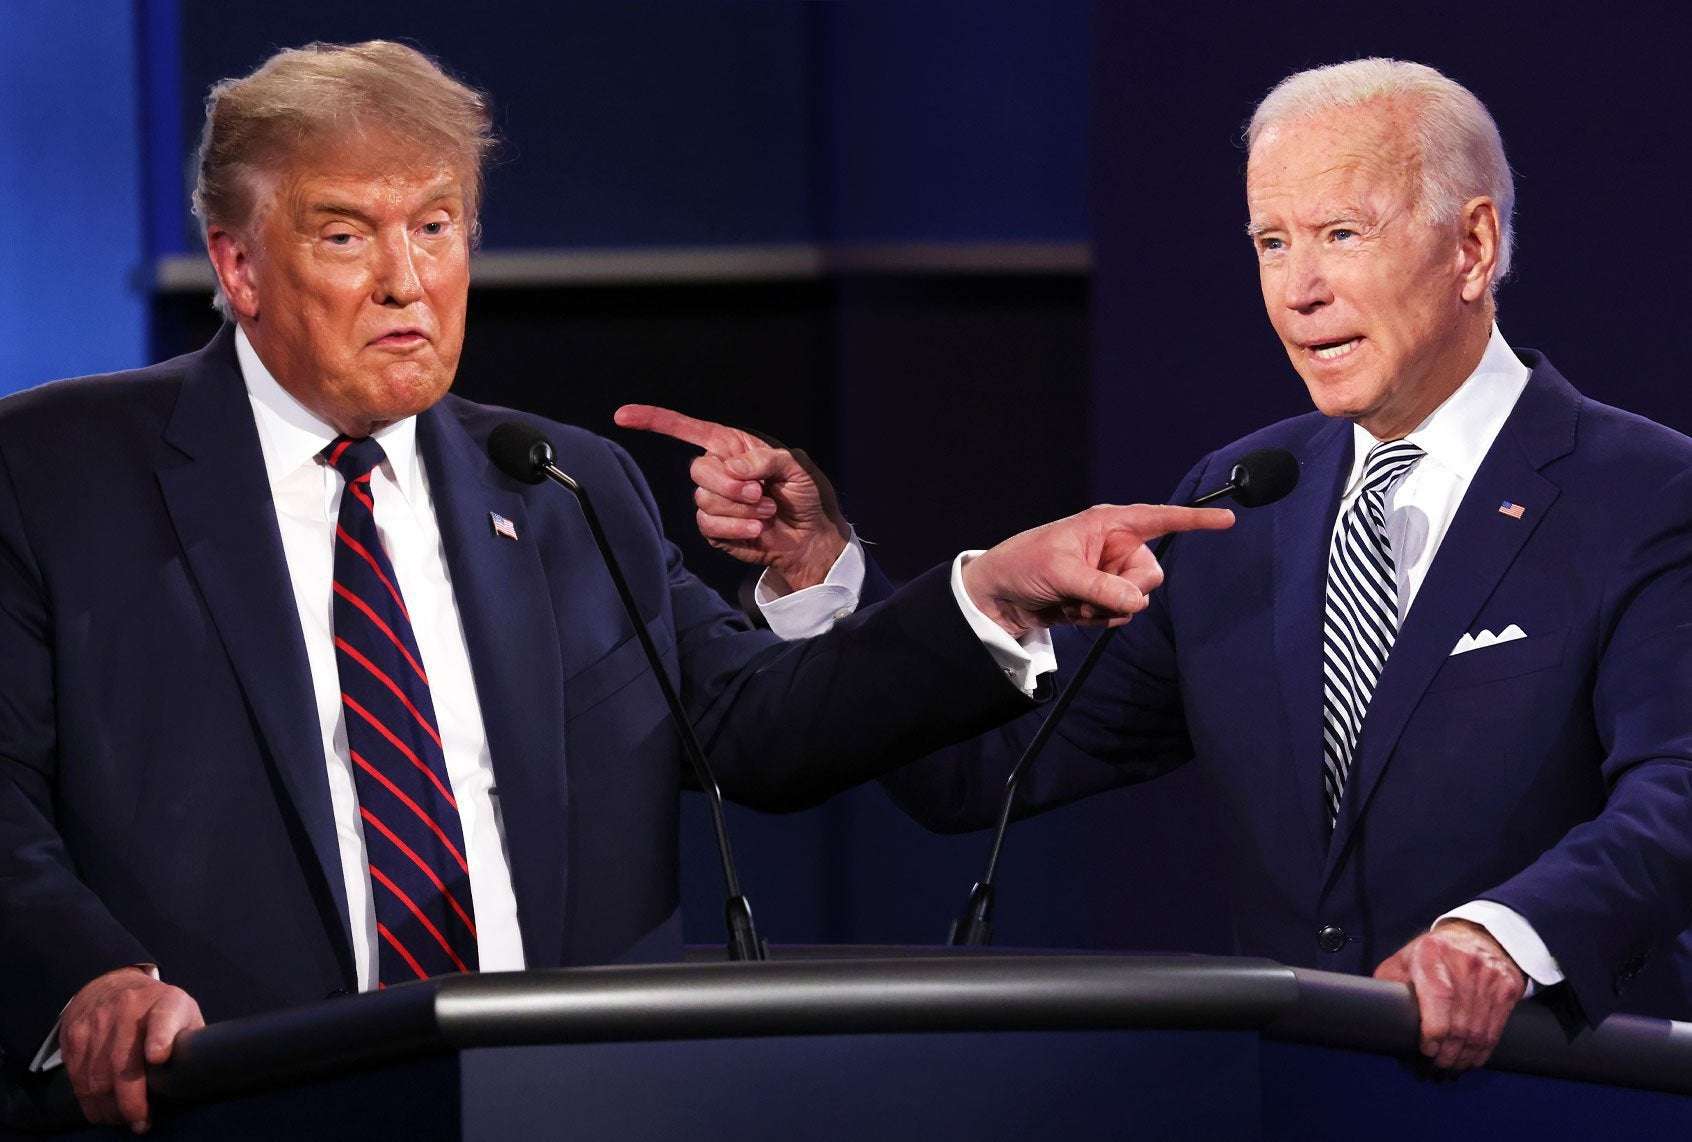 image for Trump is scared sh**less: He can't handle the truth, so he wouldn't let Biden talk